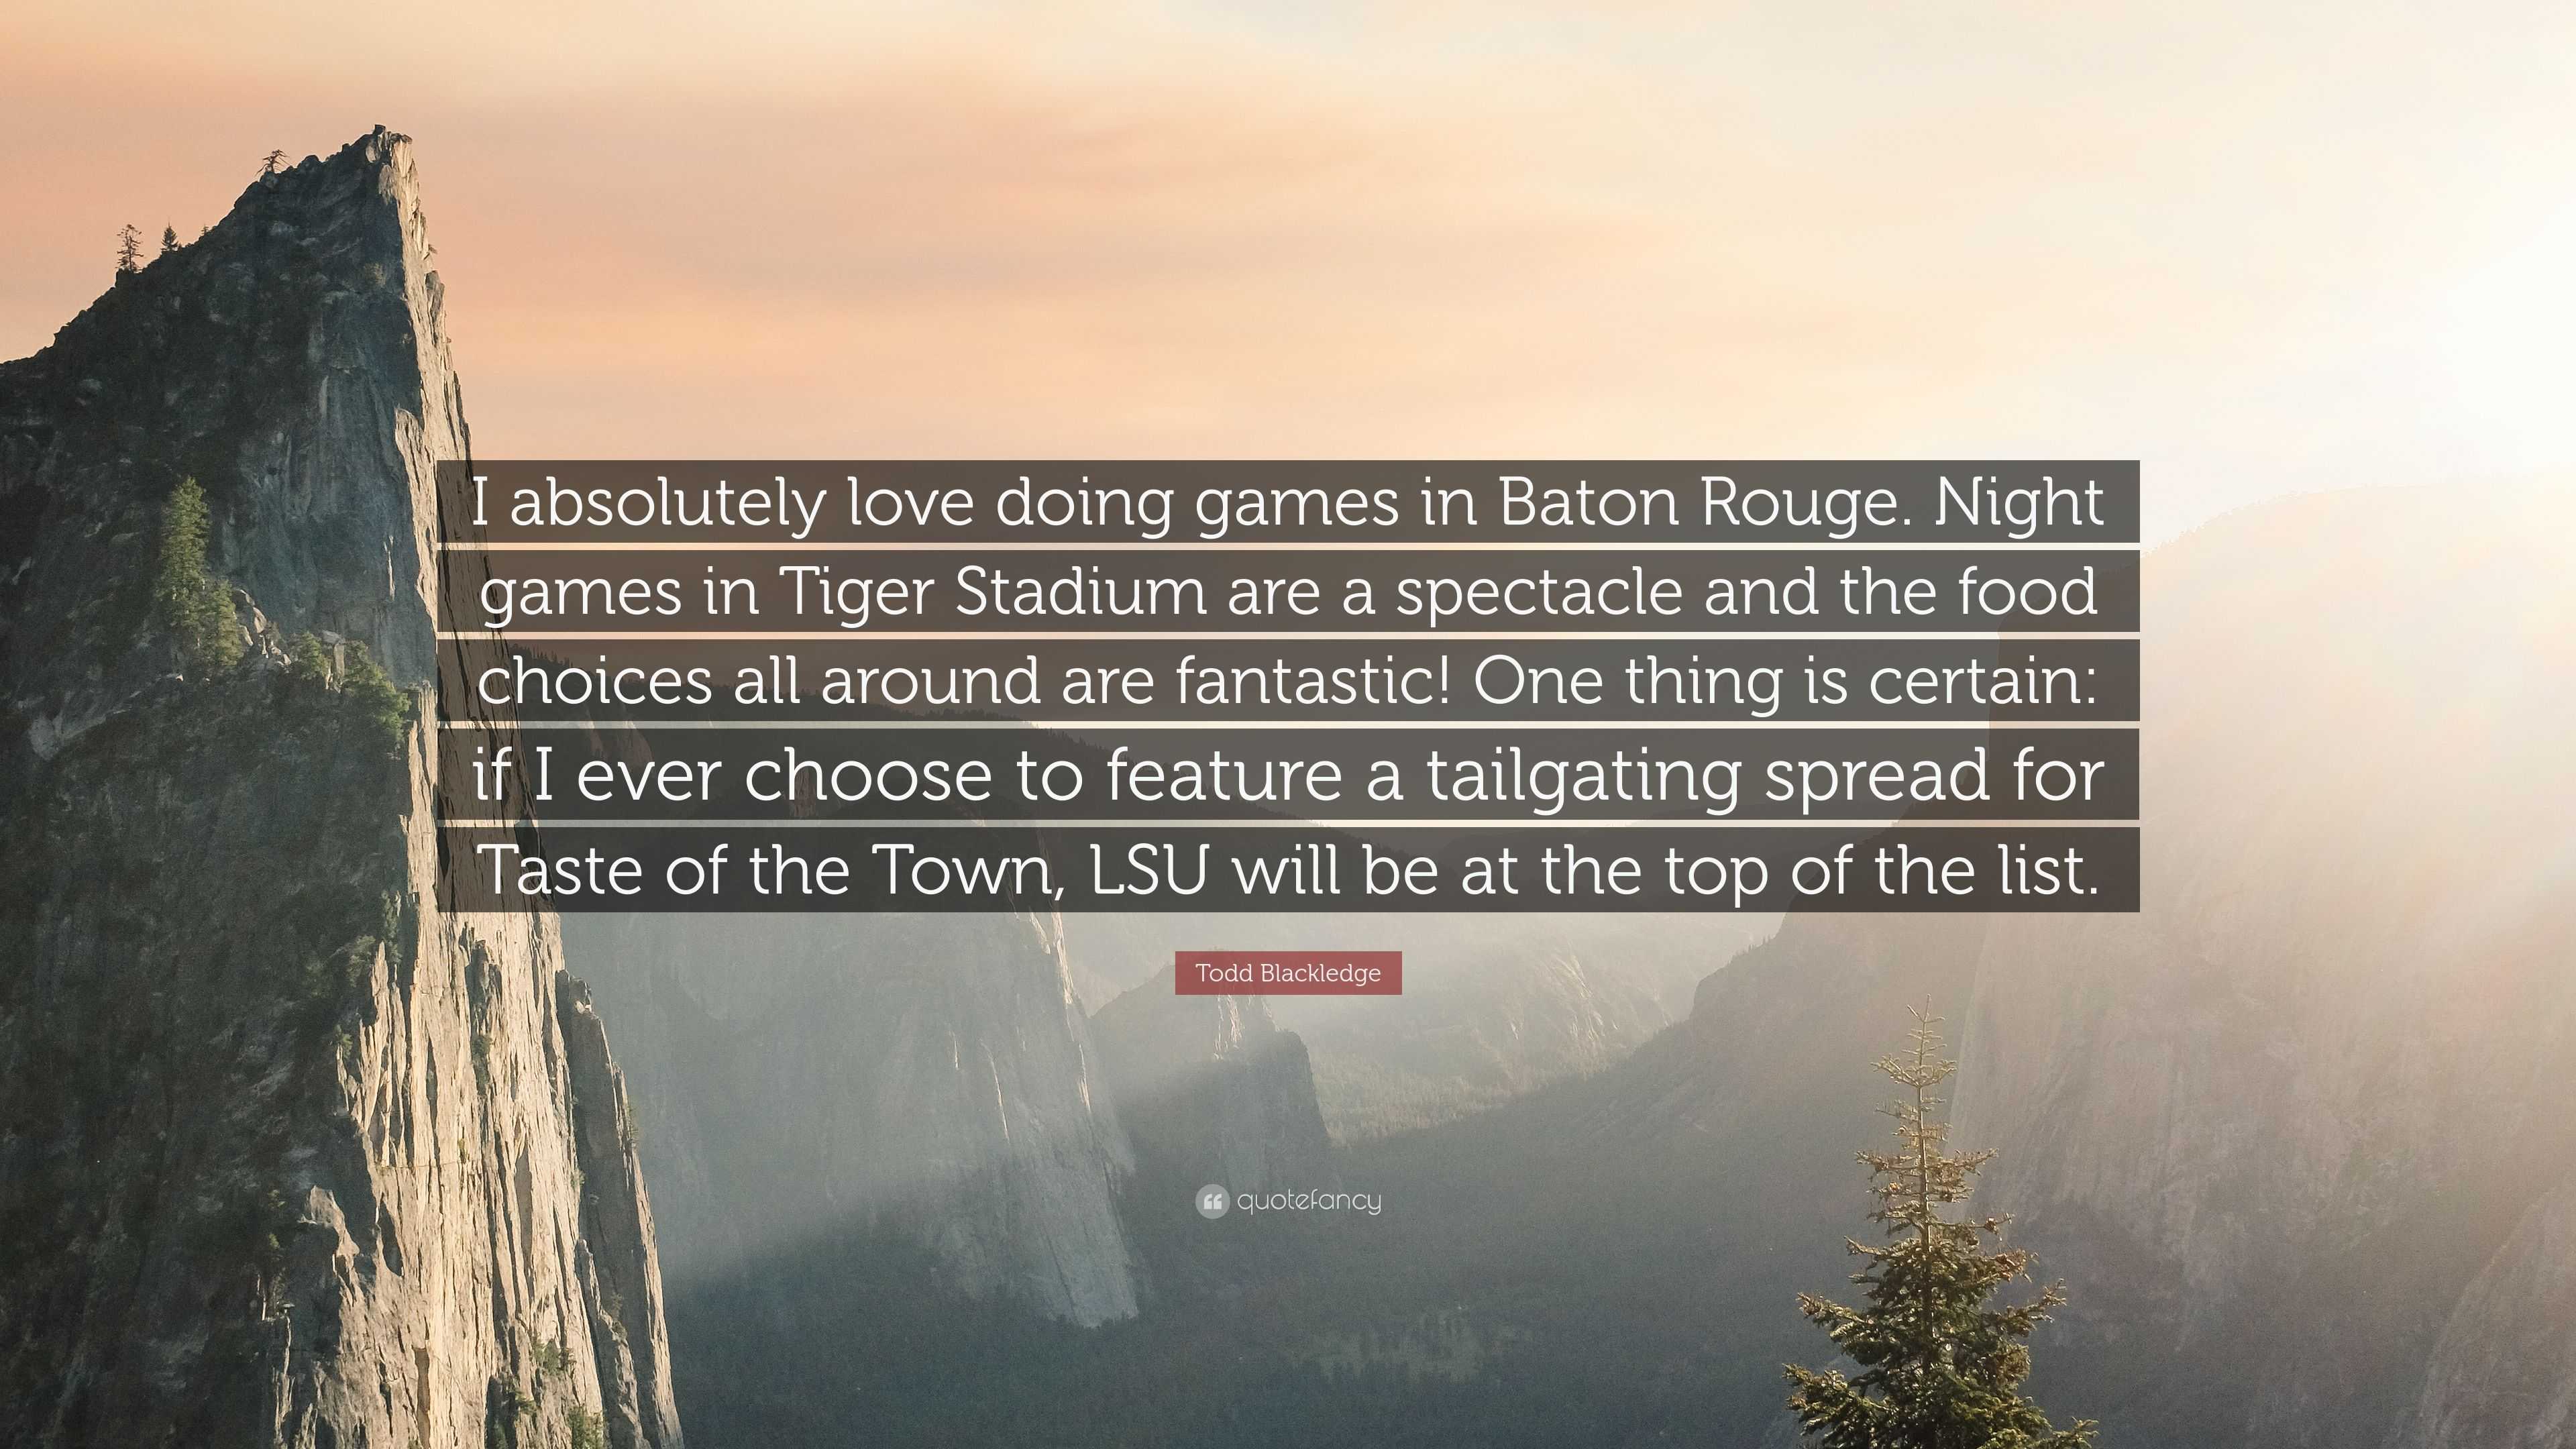 Todd Blackledge Quote: “I absolutely love doing games in Baton Rouge. Night  games in Tiger Stadium are a spectacle and the food choices all arou”